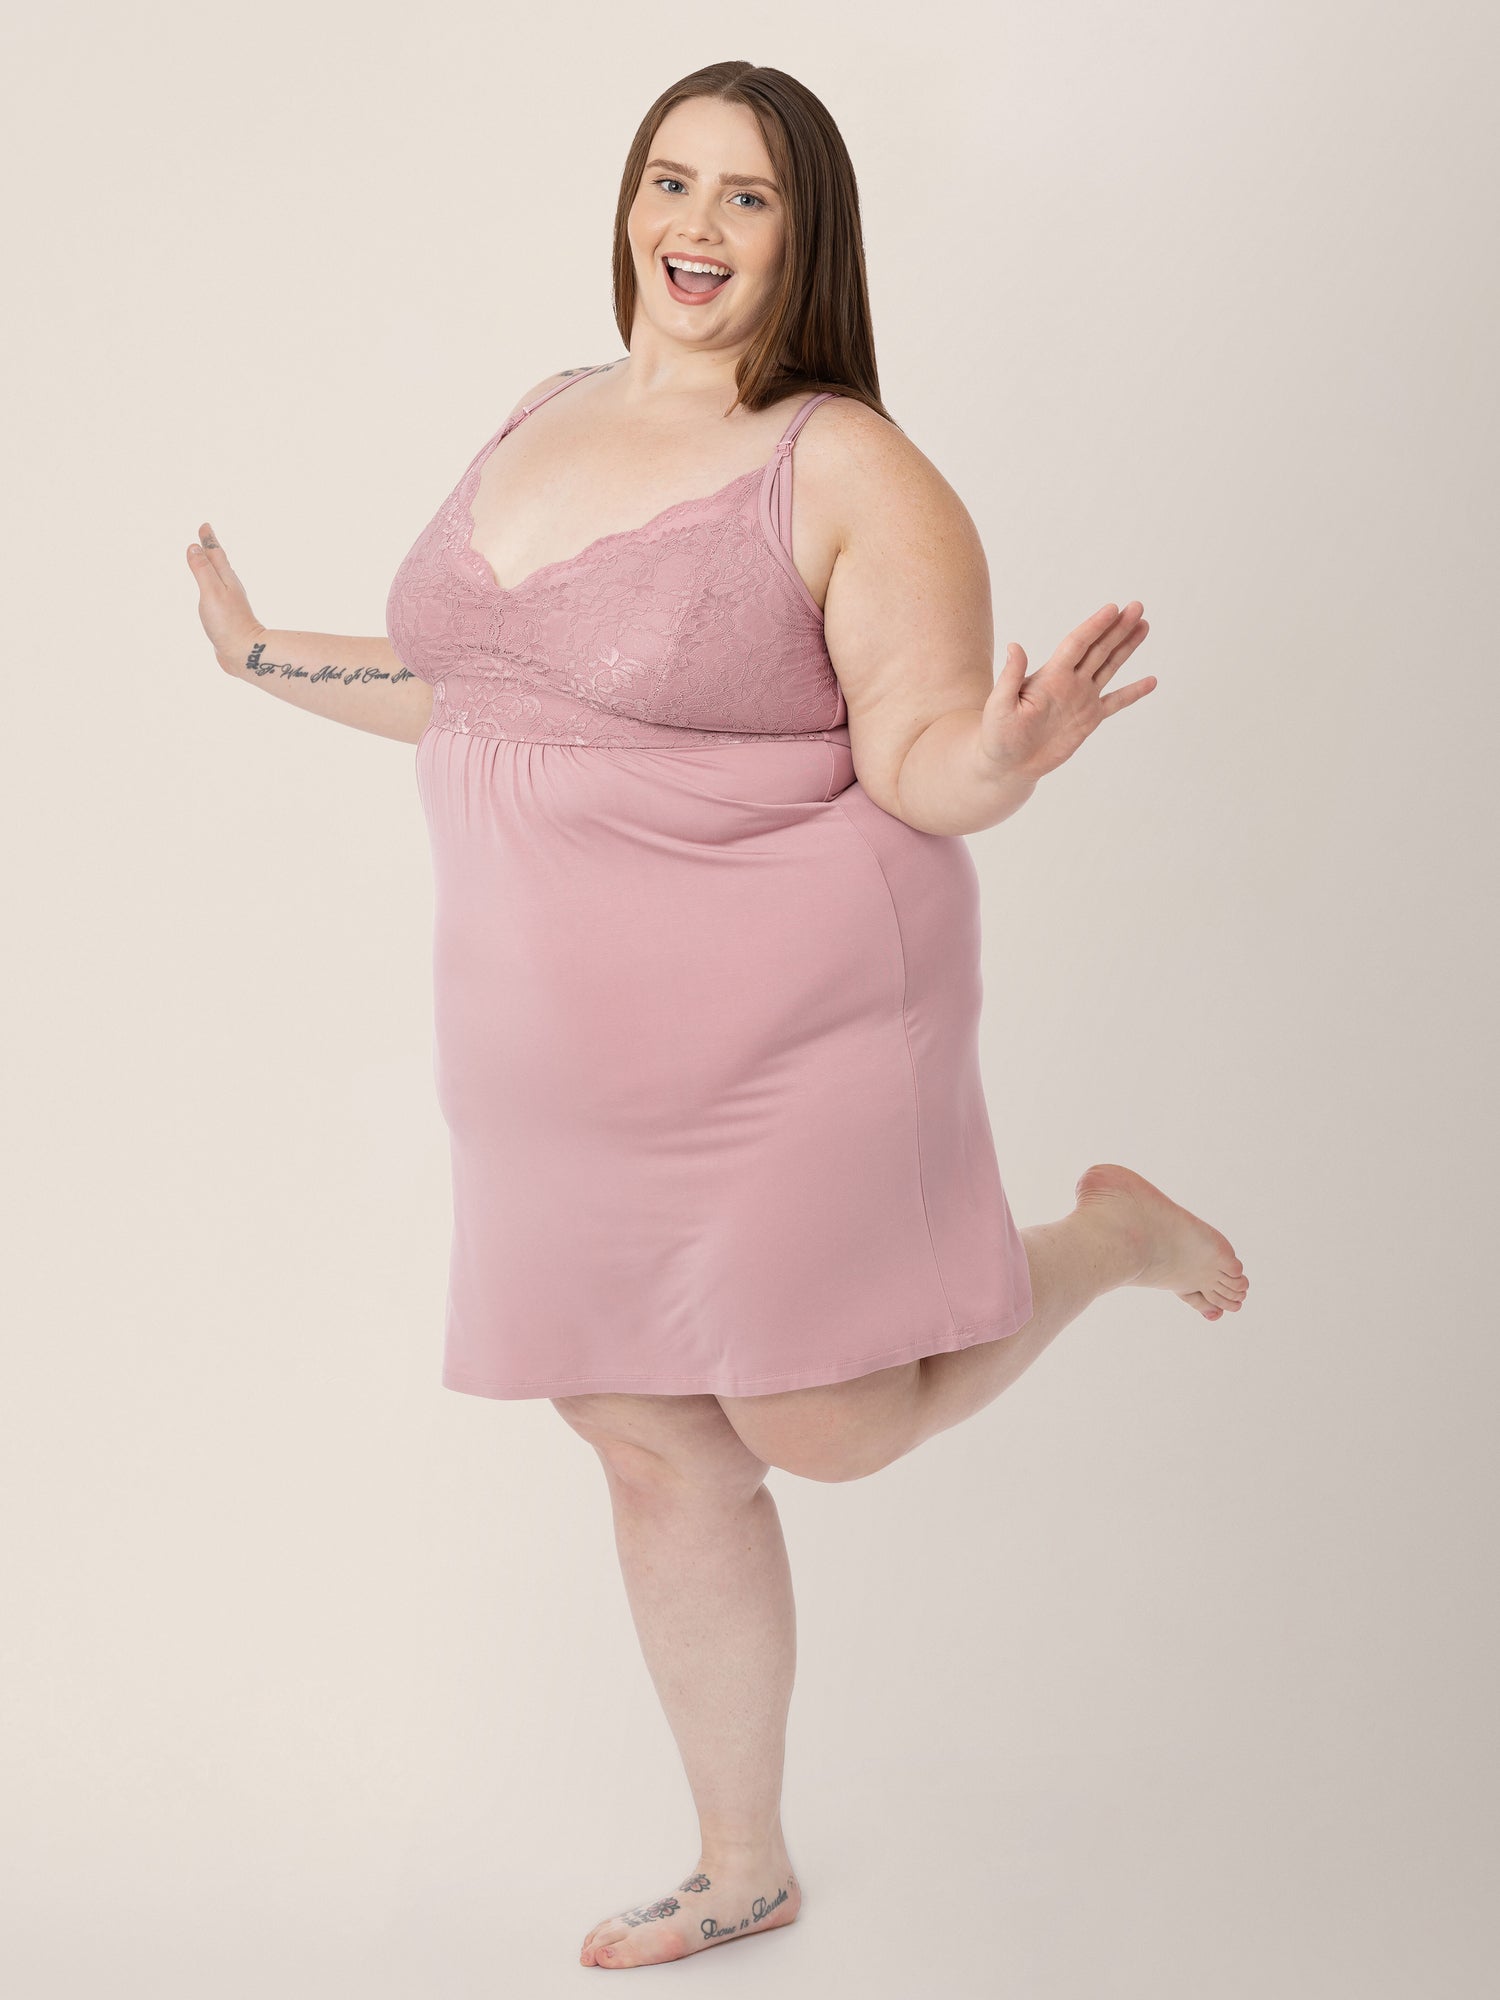 Model wearing the Lucille Maternity & Nursing Nightgown in Vintage Pink standing on one leg and smiling. @model_info:Hayley is 5'7" and wearing a 1X.